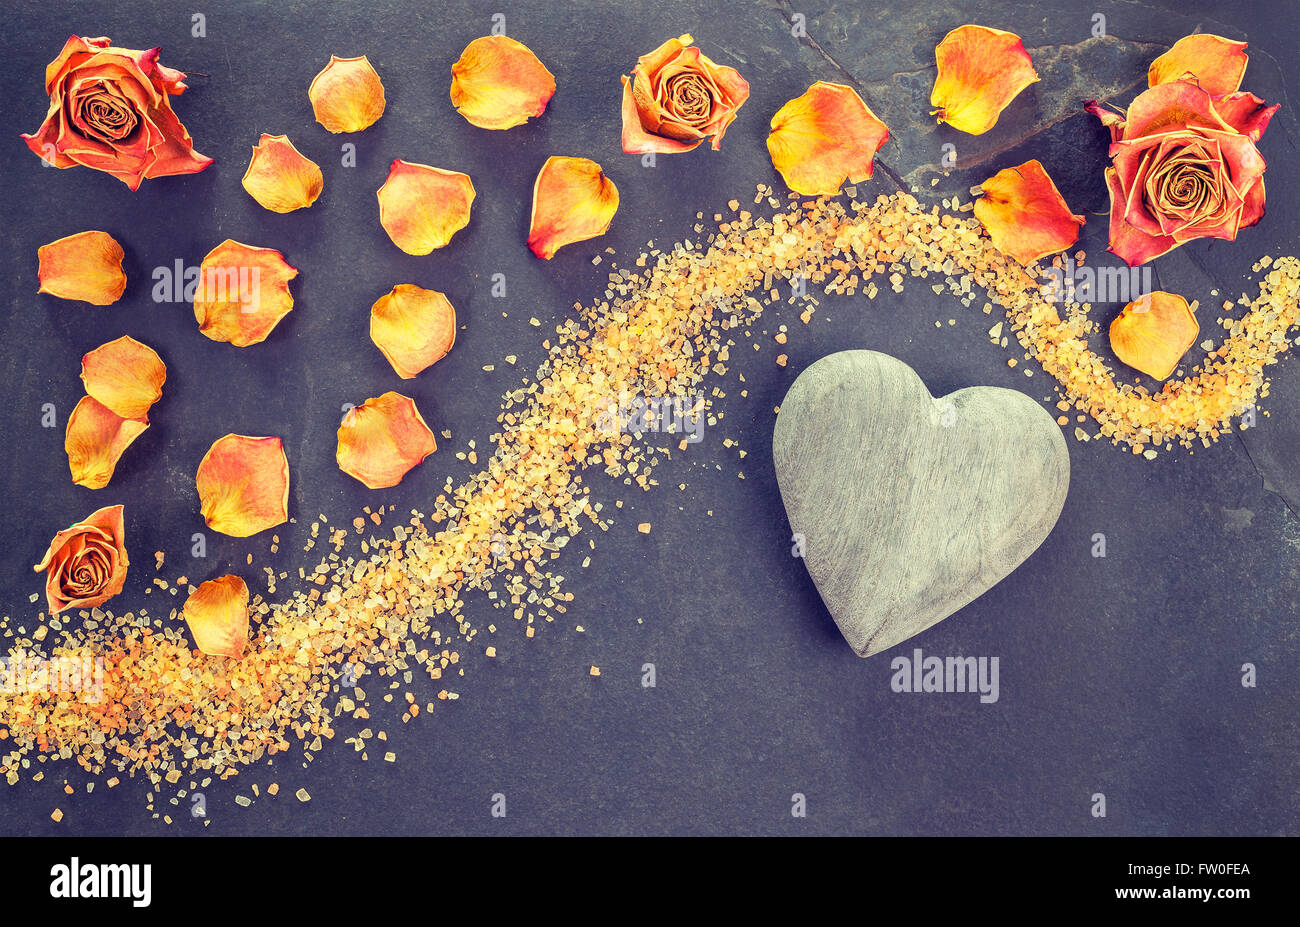 Vintage stylized dried roses and wooden heart on slate background. Stock Photo